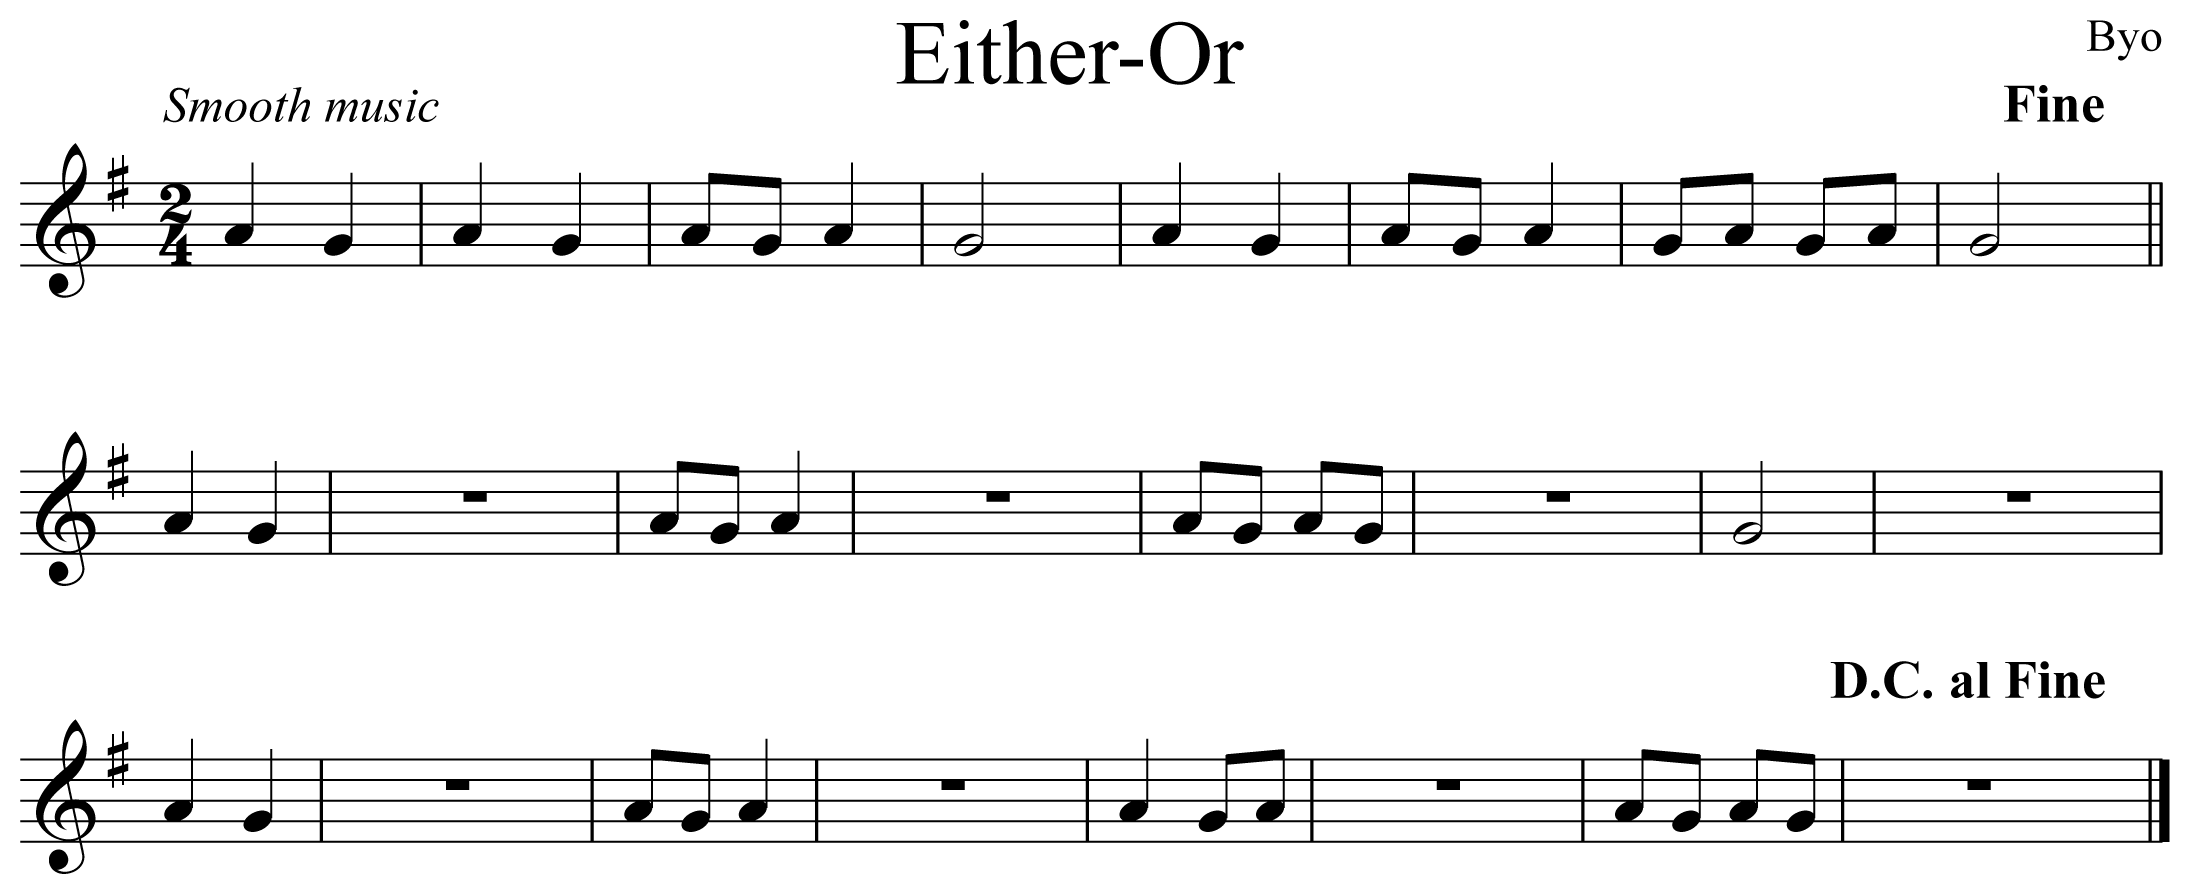 Either Or Music Notation Trumpet